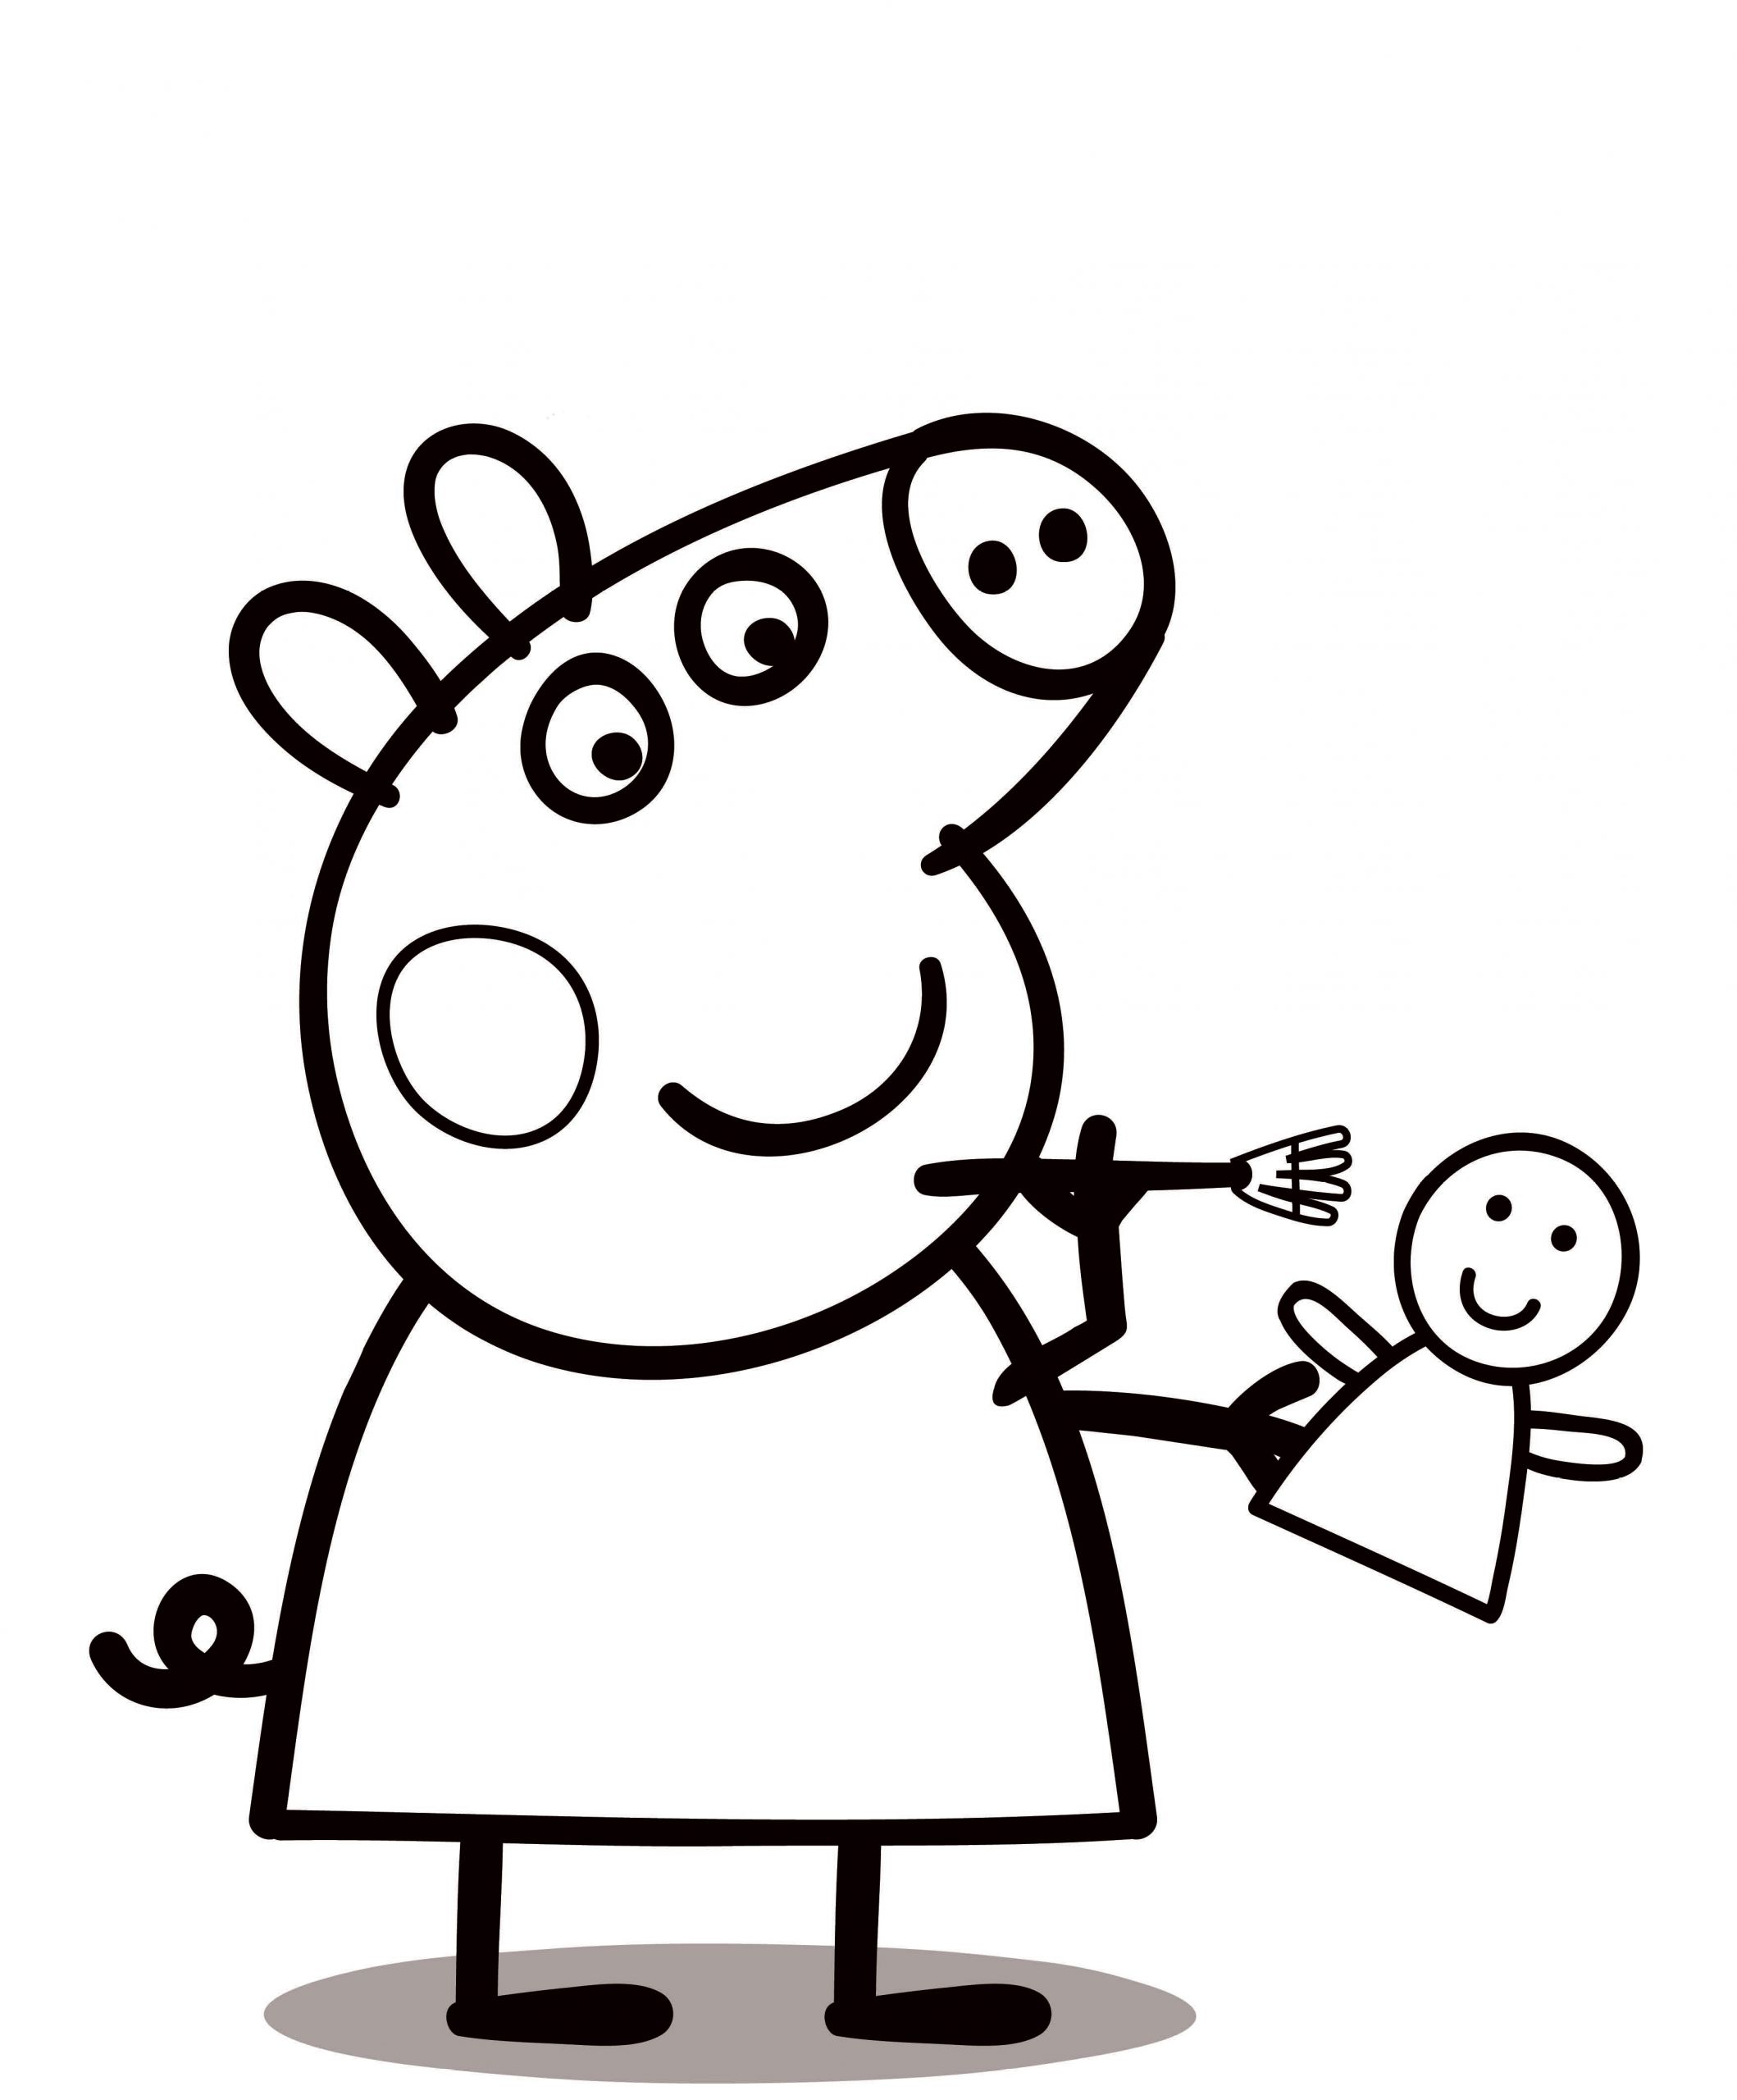 Peppa Pig Coloring Pages For Kids
 Peppa Pig coloring pages to print for free and color